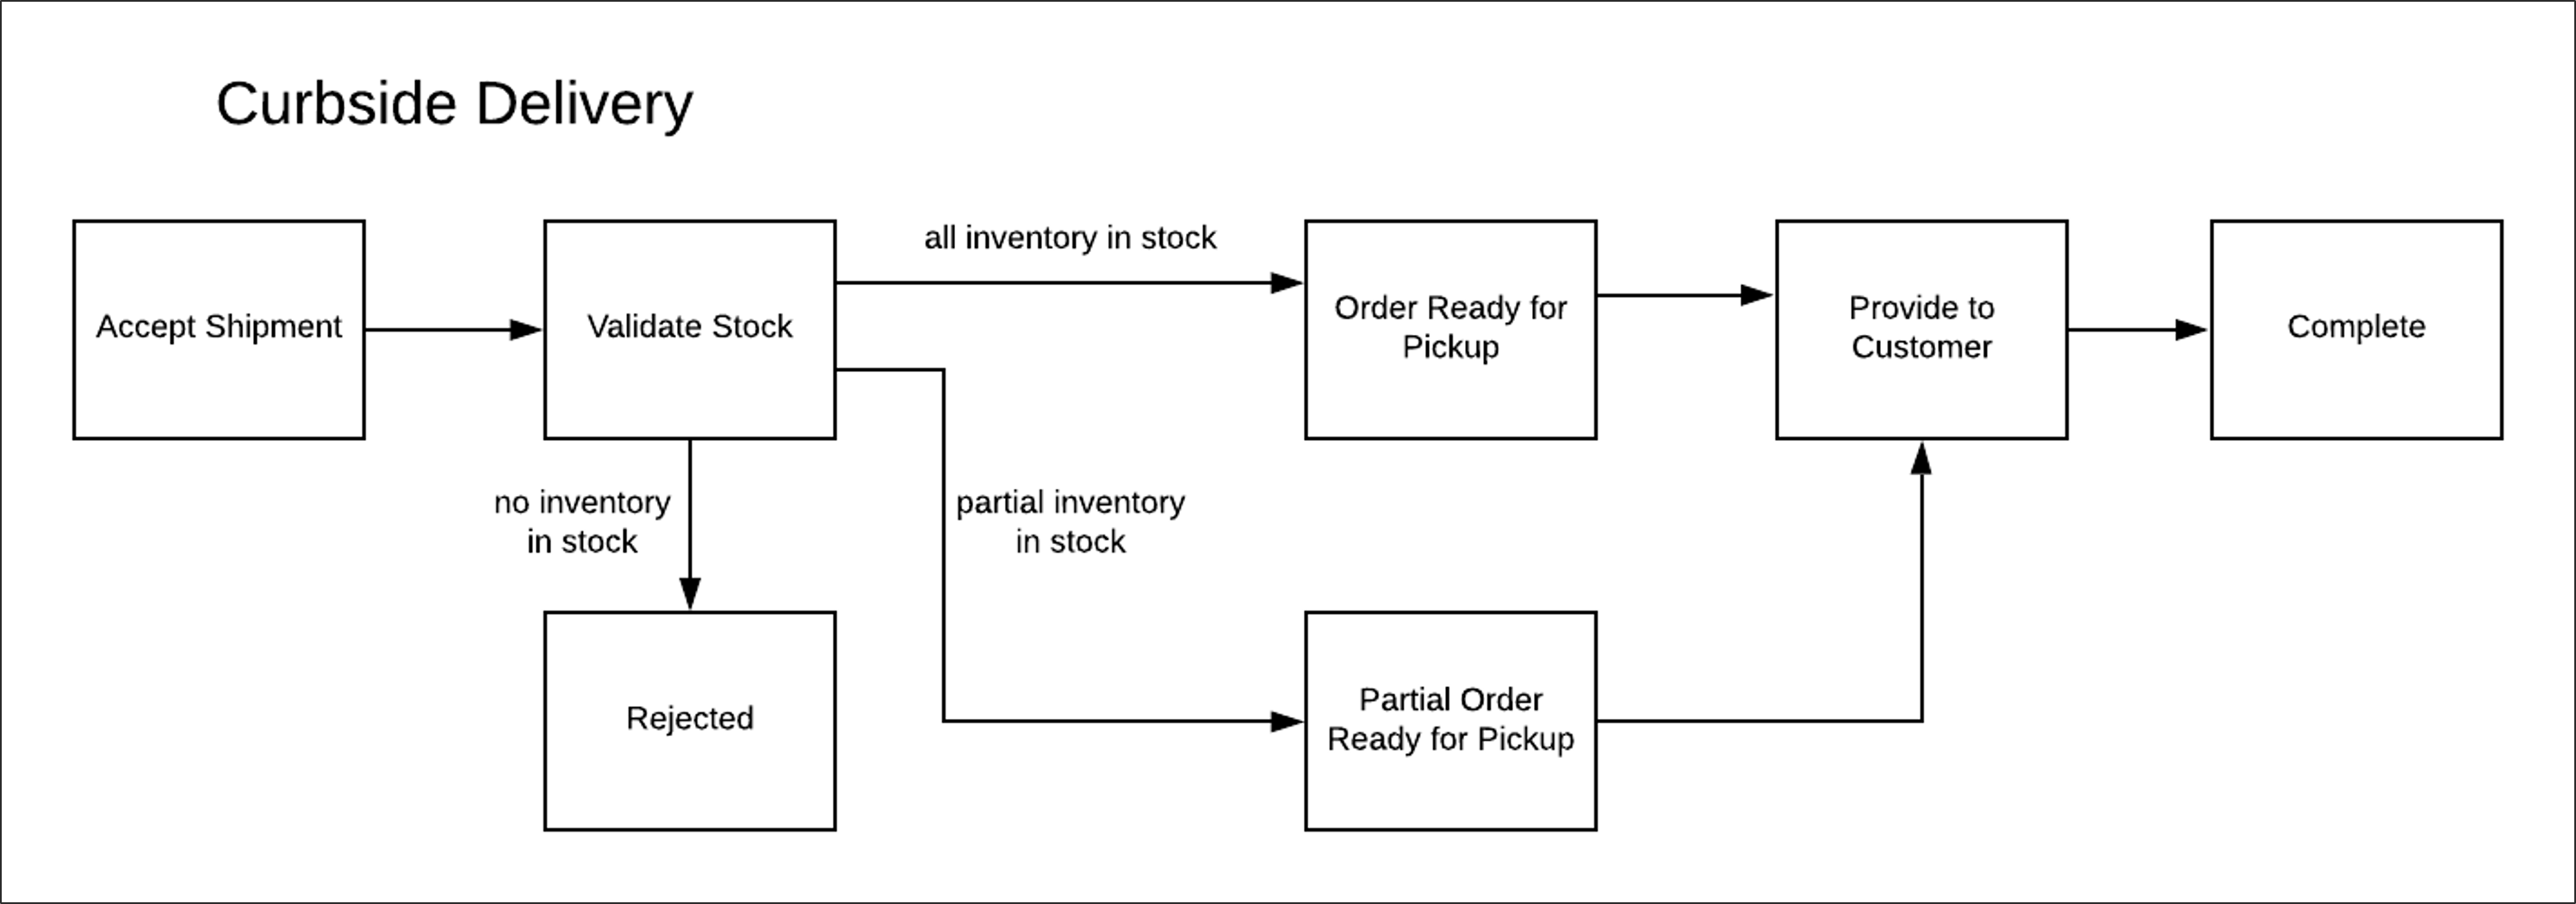 Diagram of the Curbside Delivery workflow